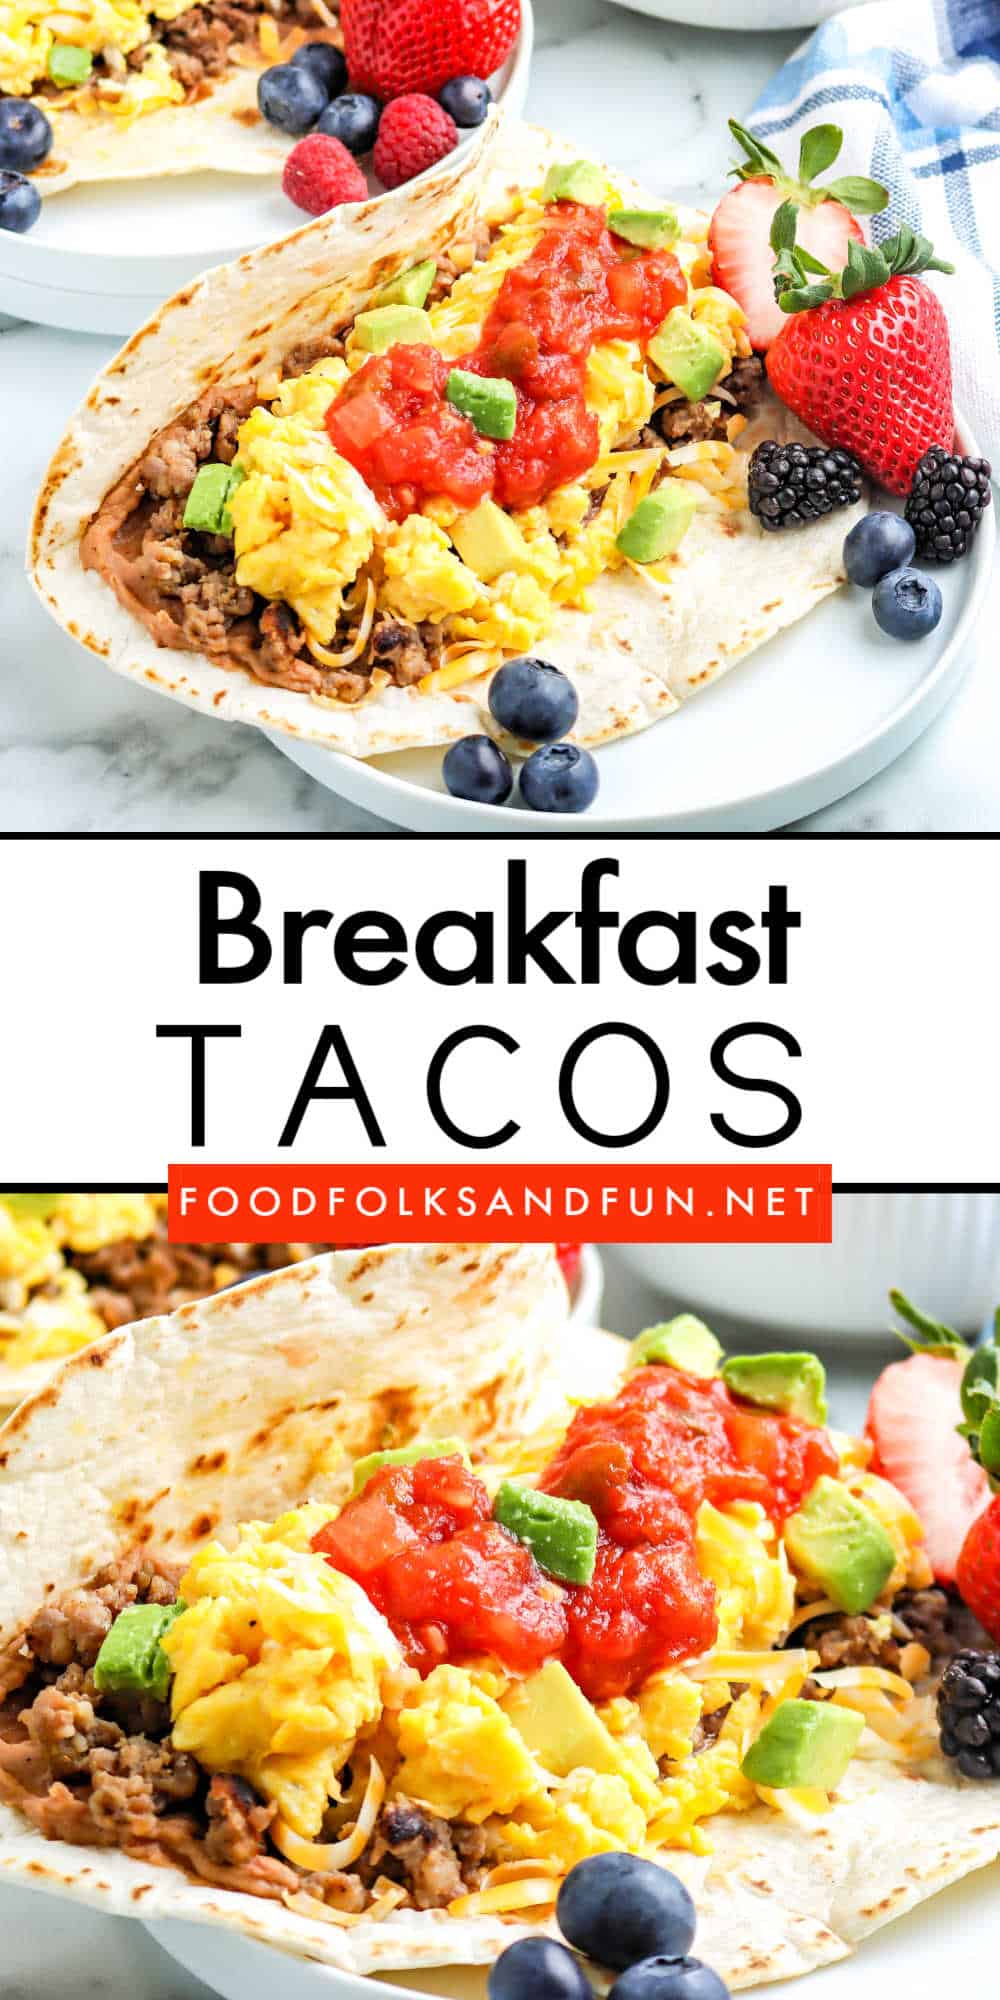 These breakfast tacos, featuring eggs, sausage, refried beans, and many other Mexican goodies, are my secret weapon for out-of-town guests. They’re easy to prepare and throw together, and everyone always loves them!
 via @foodfolksandfun